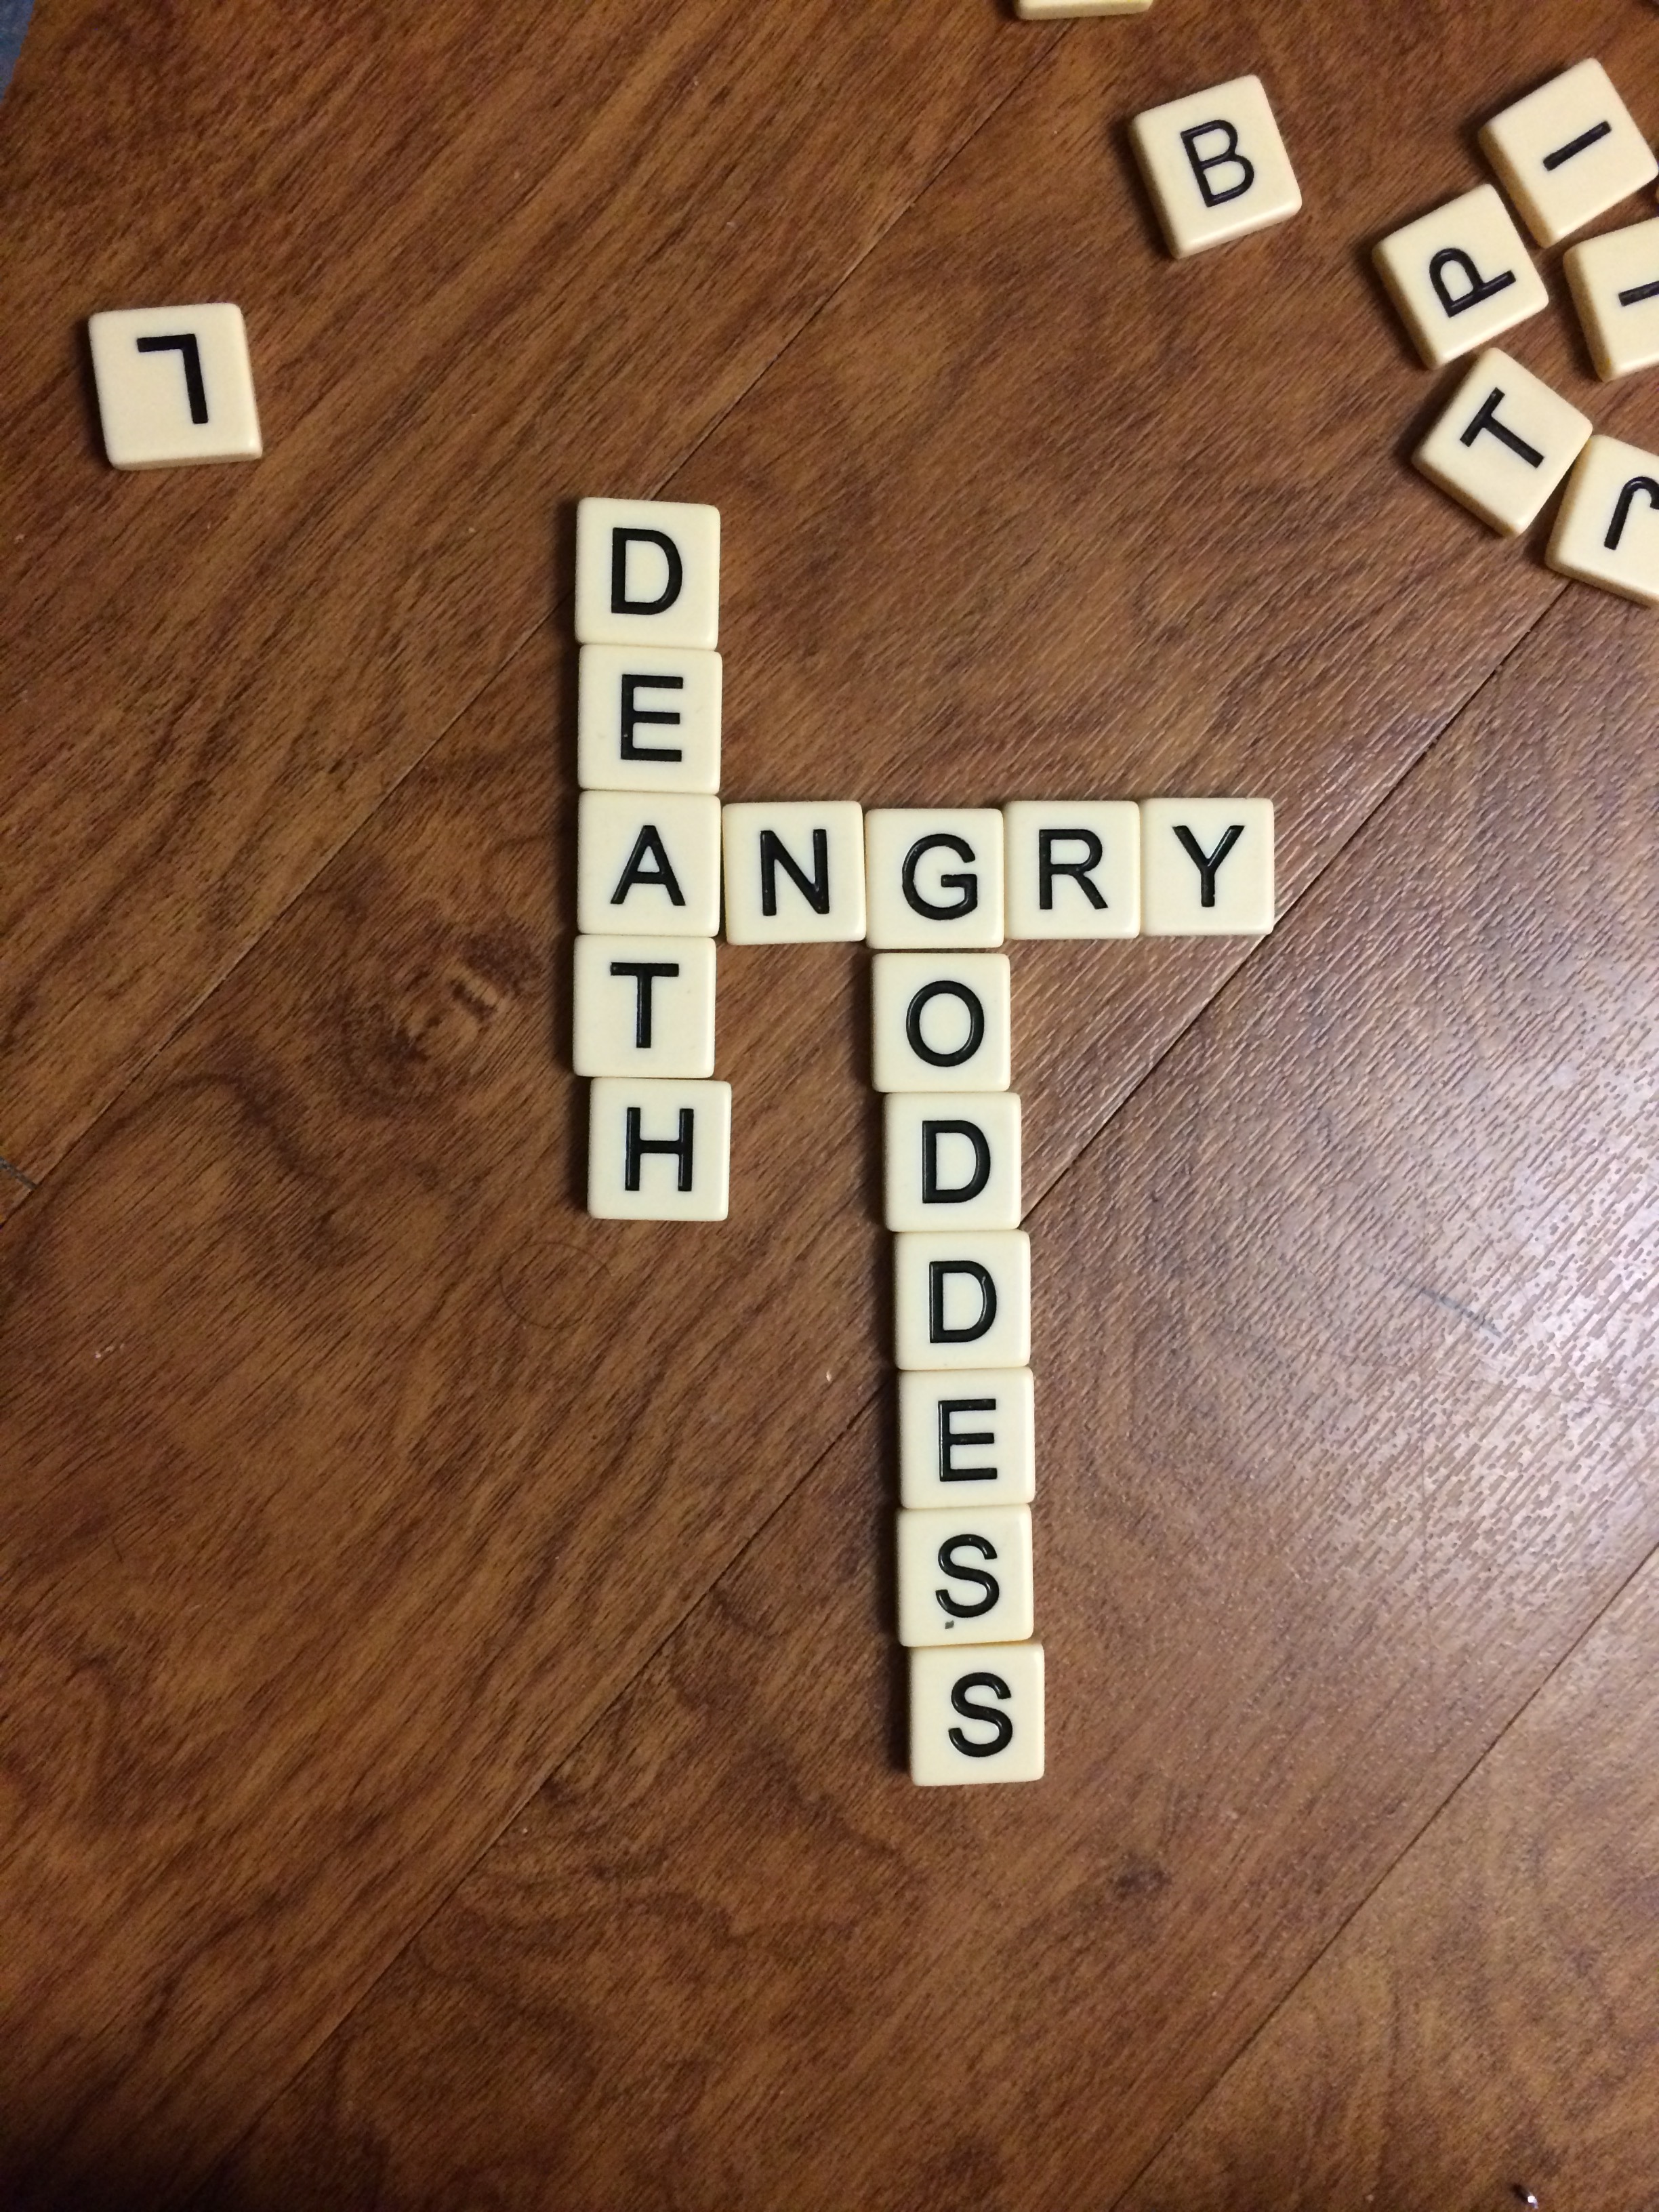 When assinged reading meets Bananagrams